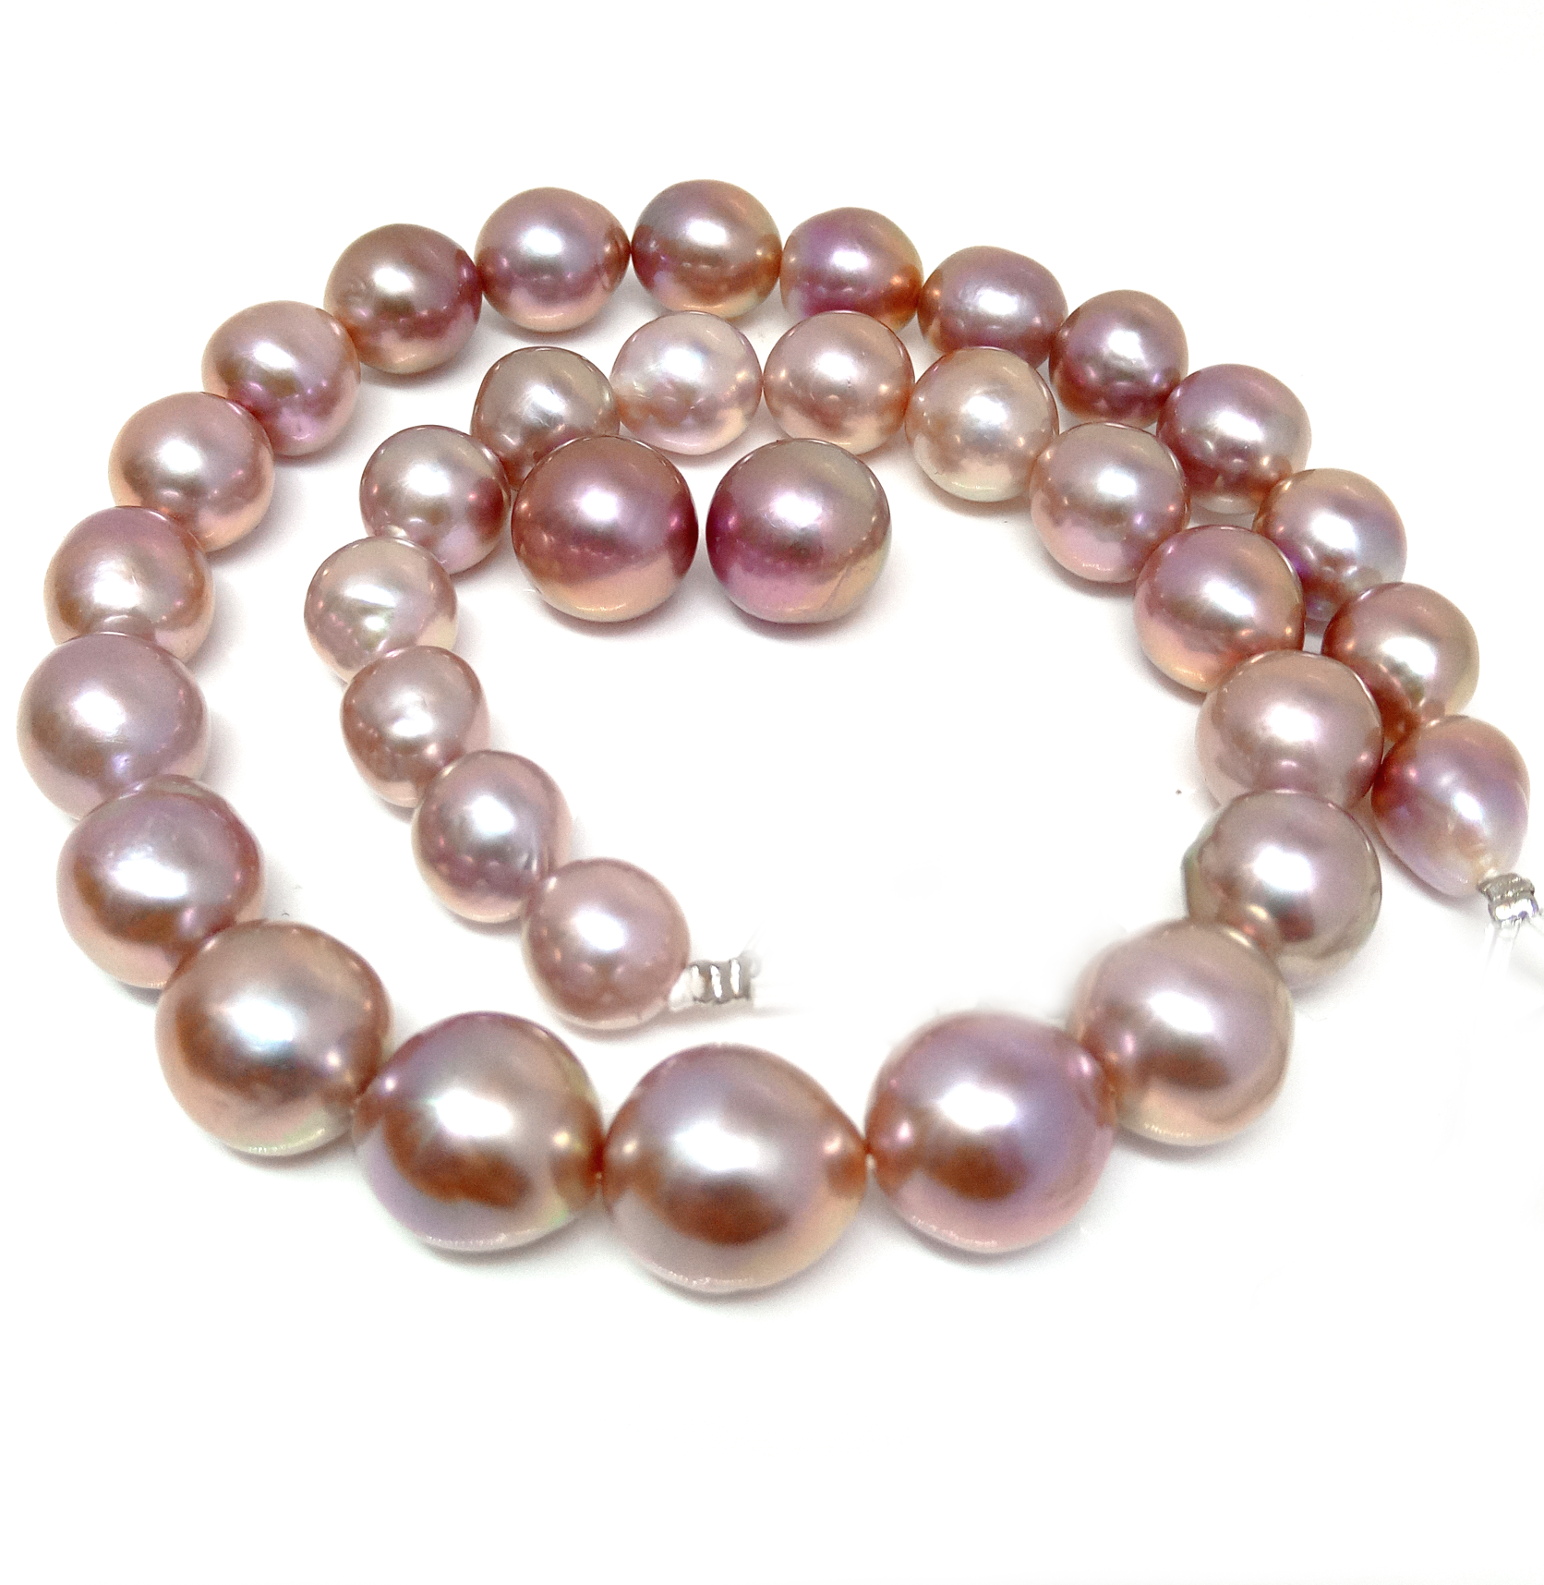 Dark Pink Edison Rounded Drop Pearls Strand